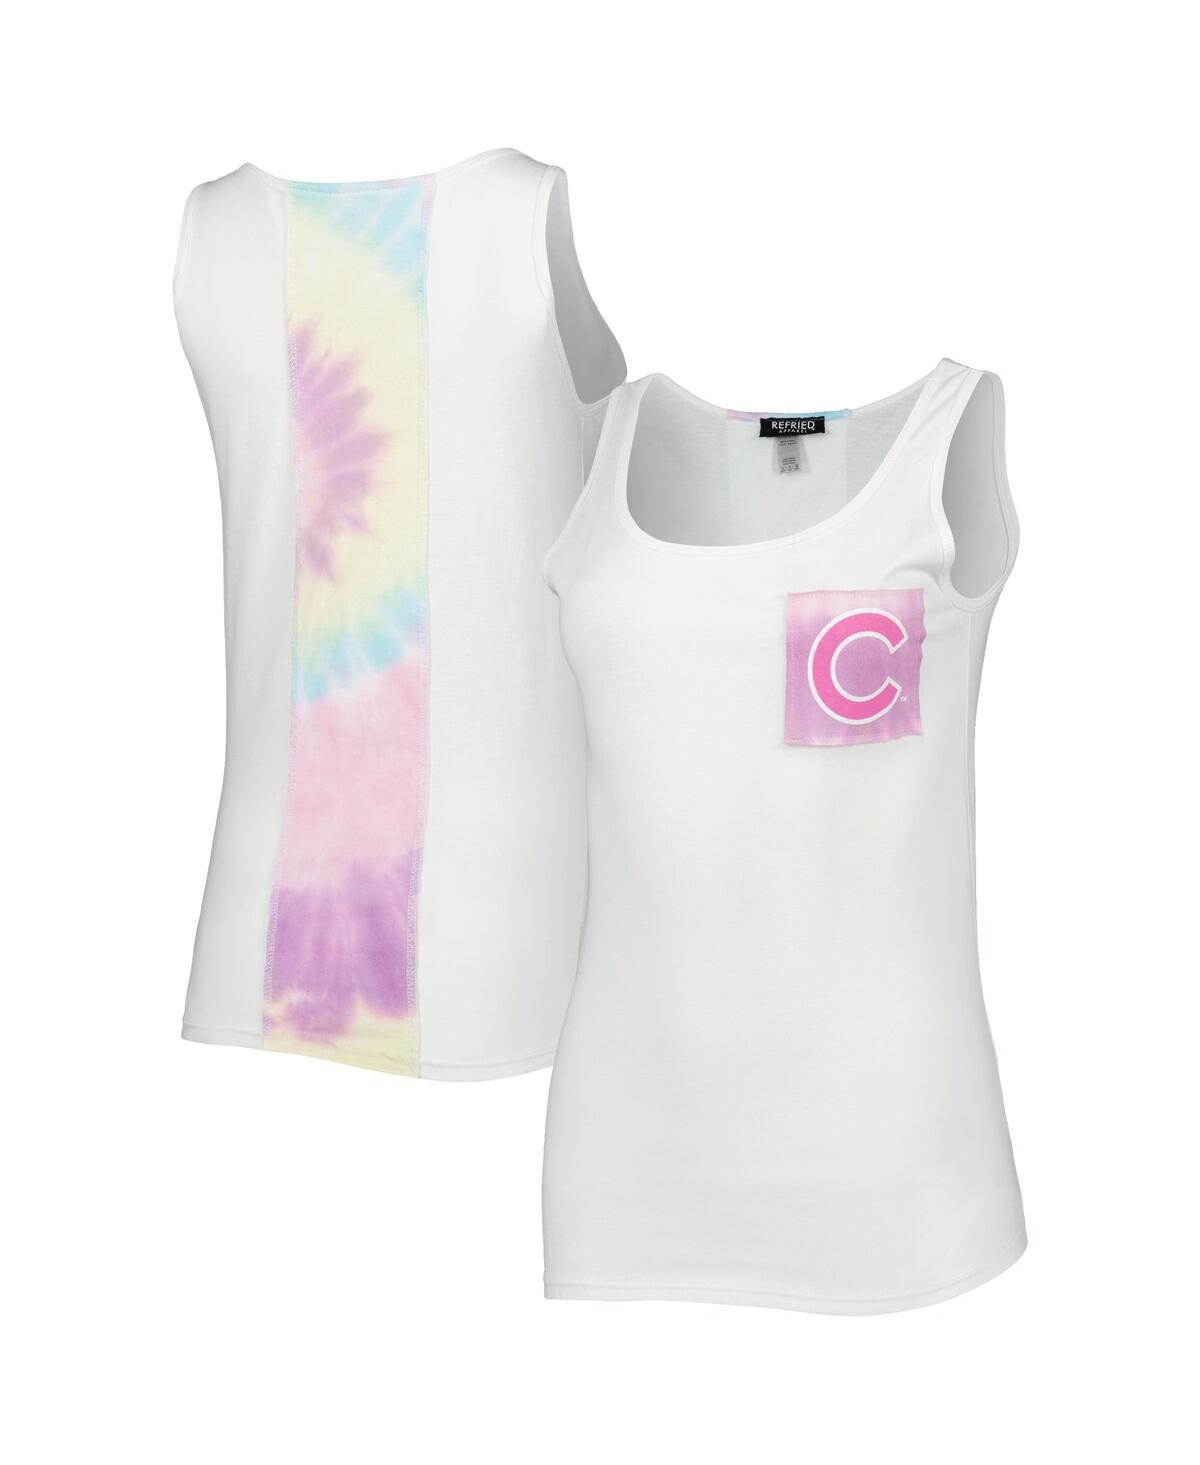 REFRIED APPAREL WOMEN'S REFRIED APPAREL WHITE CHICAGO CUBS TIE-DYE TANK TOP